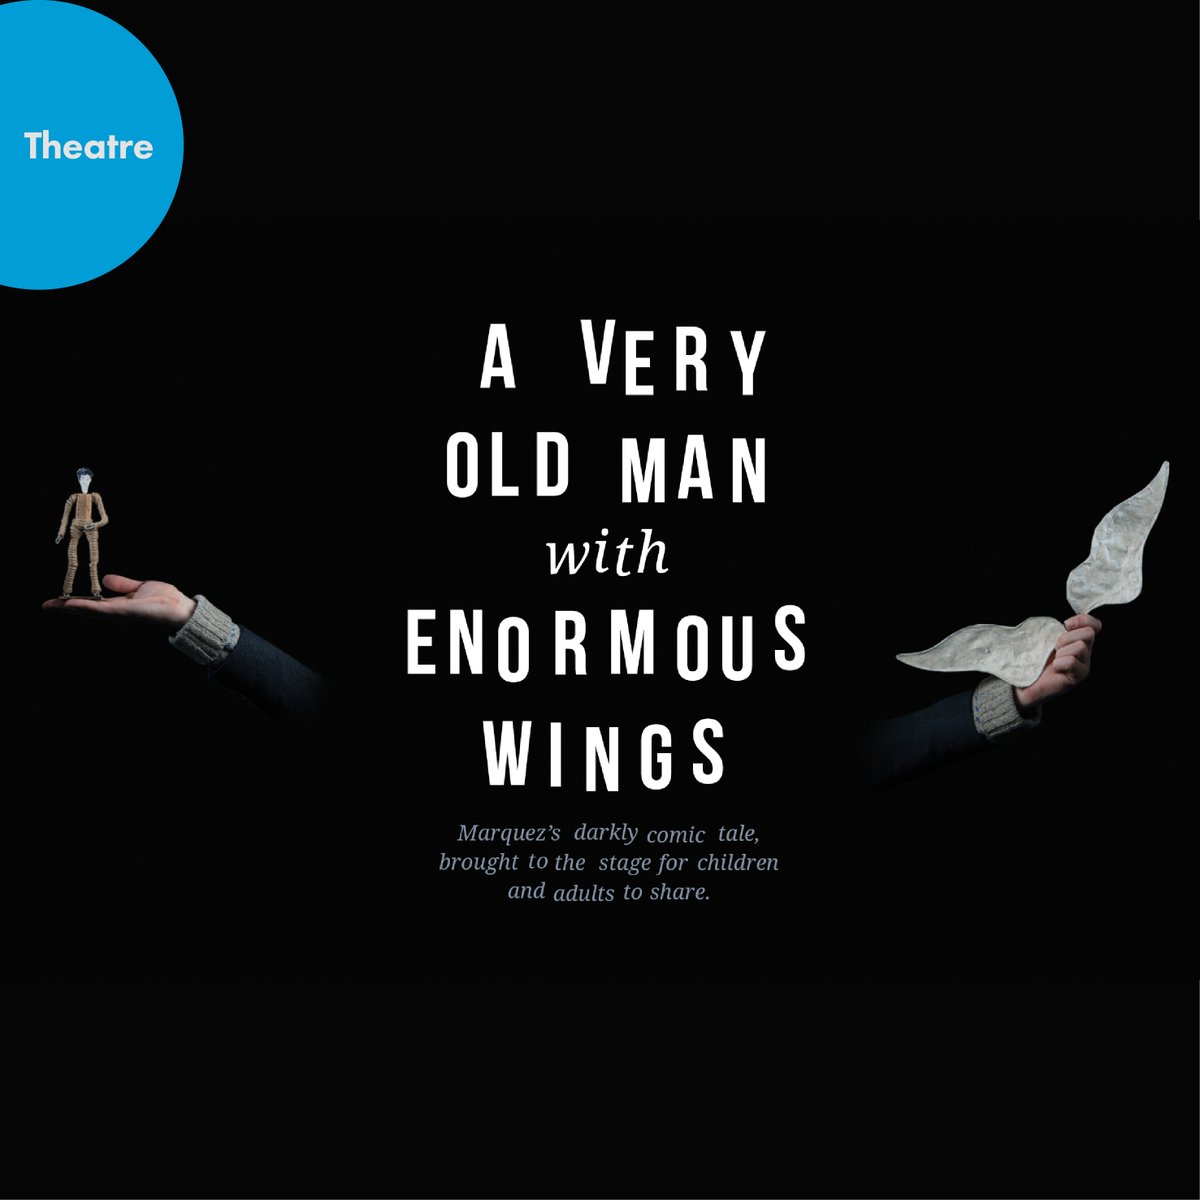 A Very Old Man with Enormous Wings a Gabriel García Márquez’s darkly comic tale, brought to the stage for children and adults to share. 📅 Saturday 4th November, 6:00 PM 🎟 Tickets £10.00 💻 2-4-1 Offer Tickets: bit.ly/AVOMWEW23